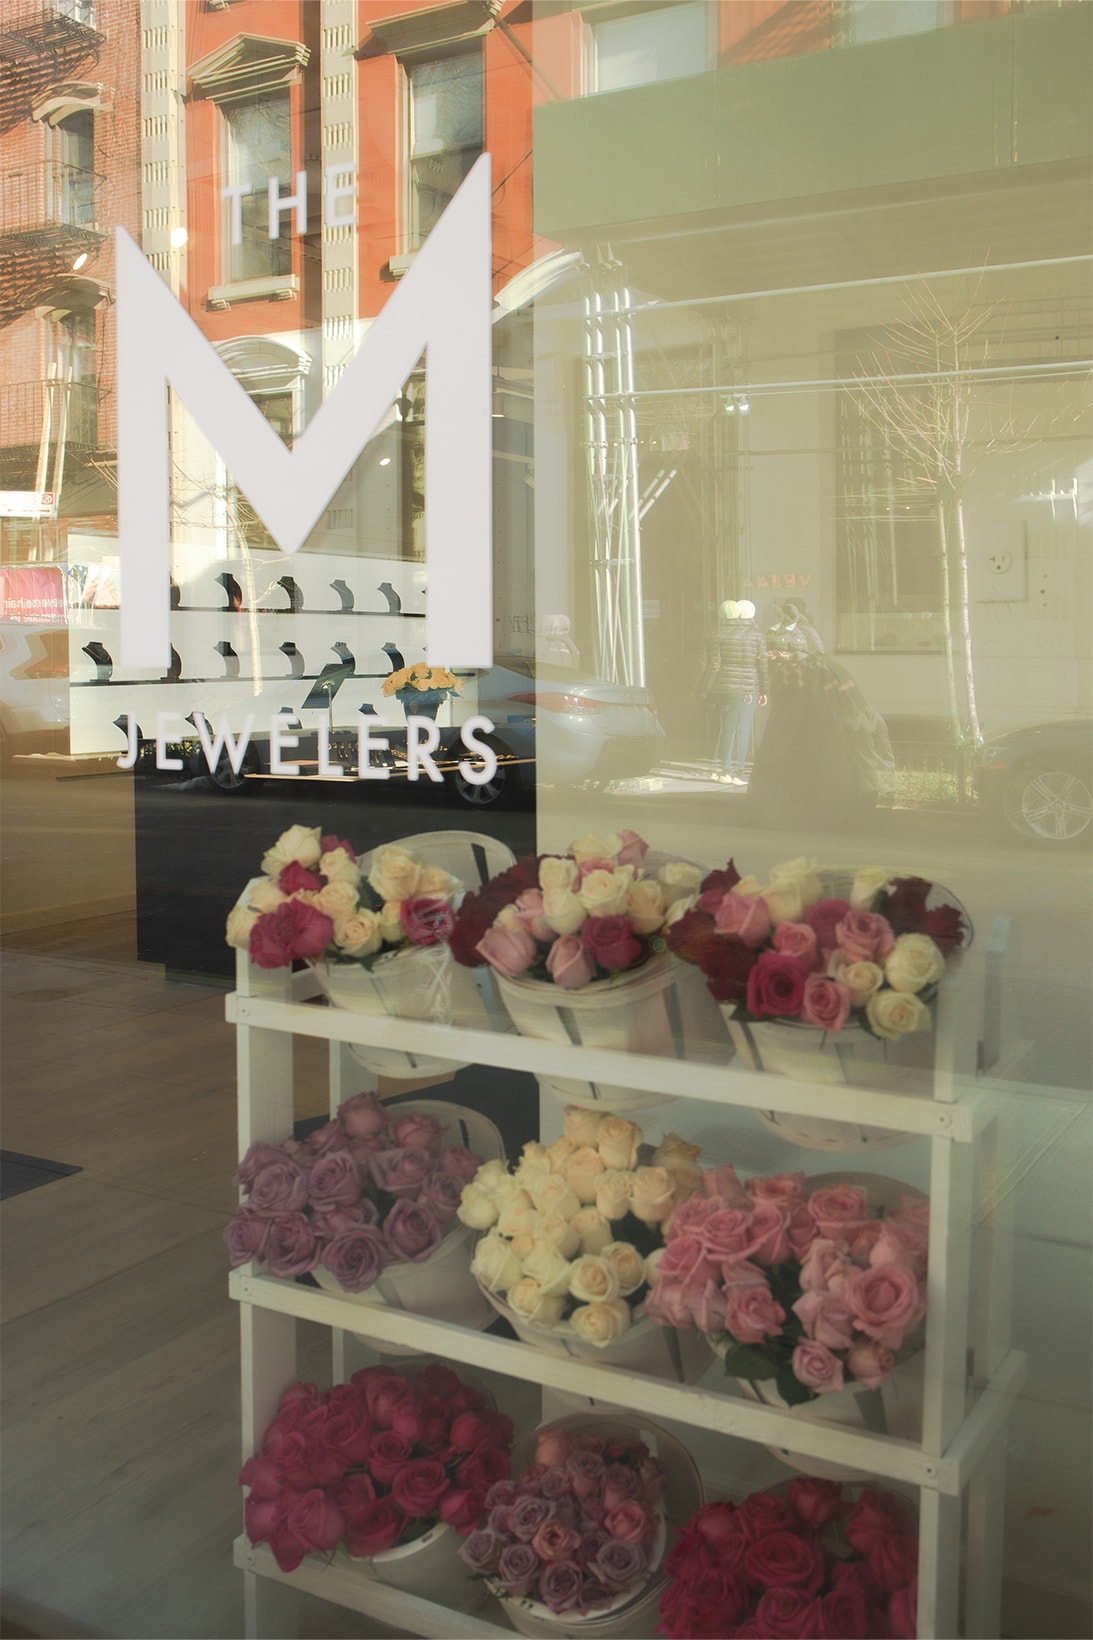 The M Jewelers NoLita Store New York Accessories Necklaces Earrings Valentine's Day Flowers